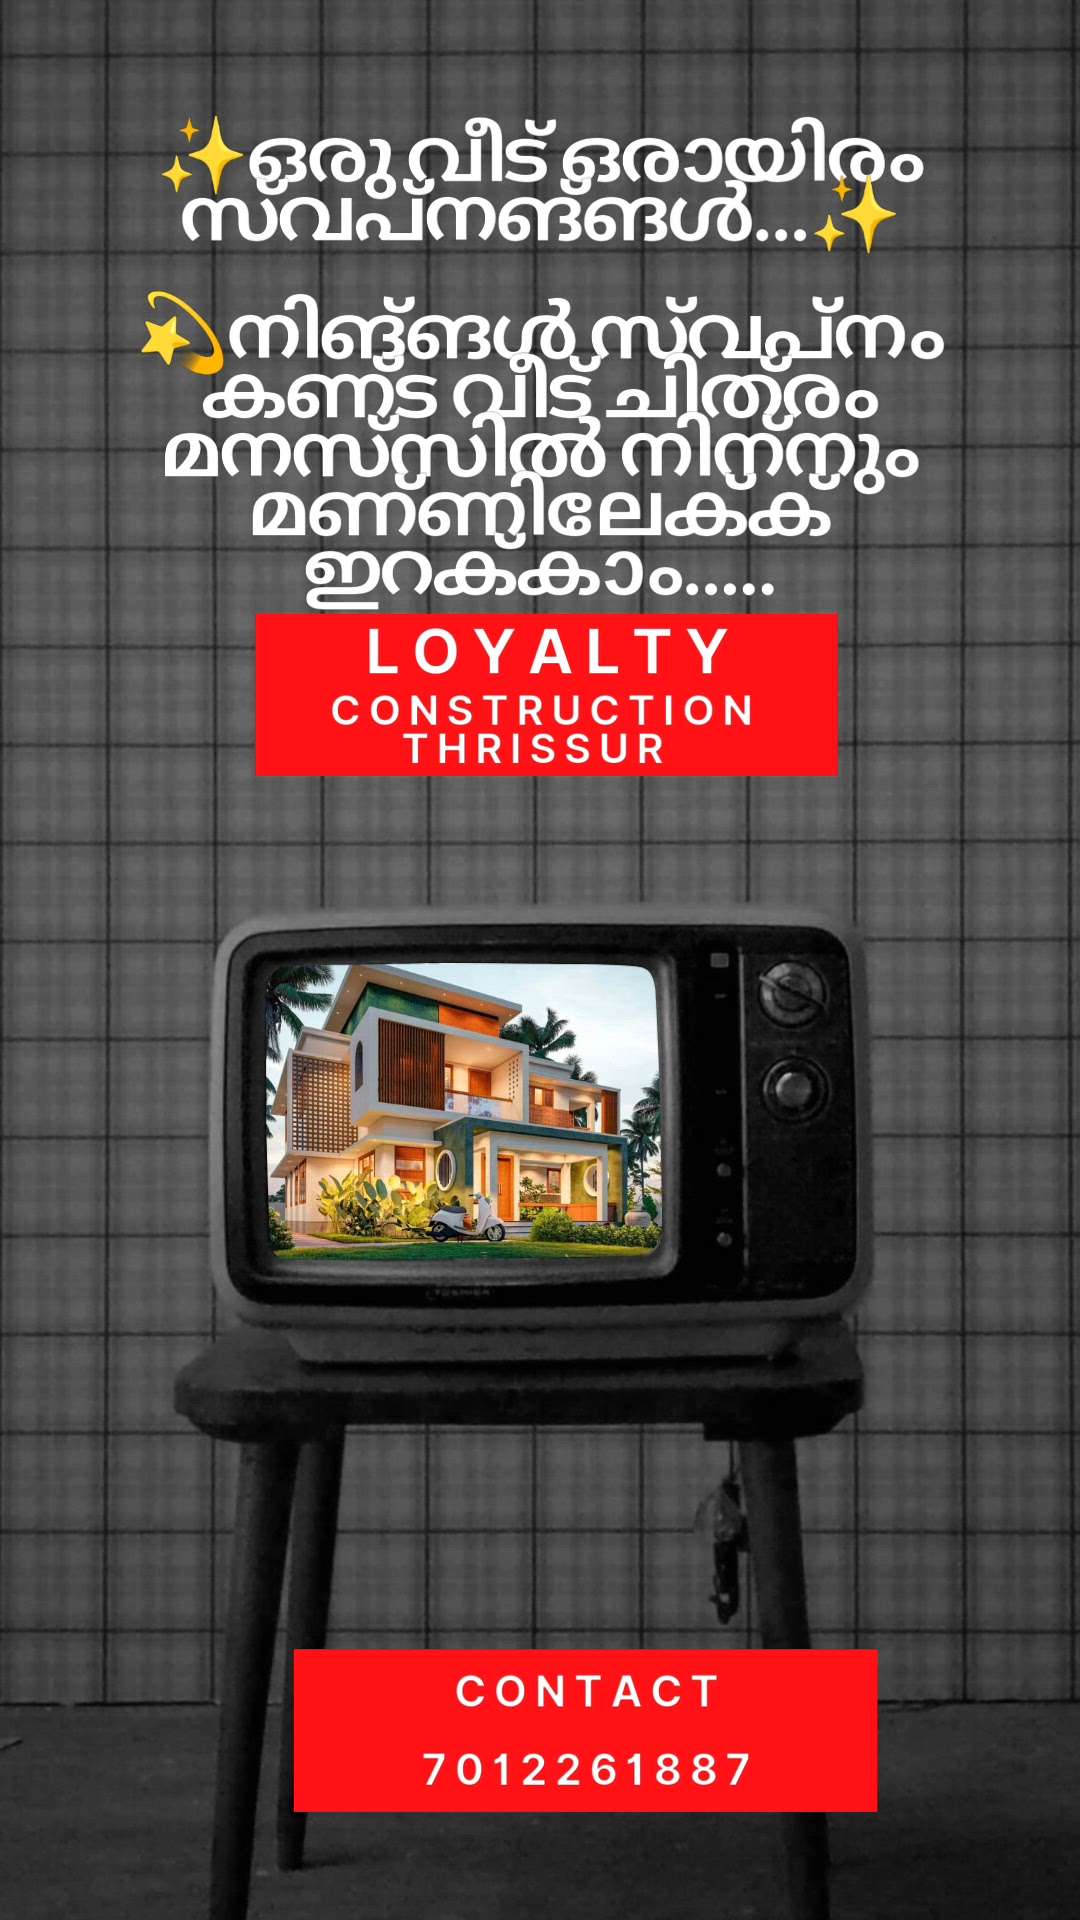 Loyalty construction Renovation Thrissur koorkenchery
contact:7012261887